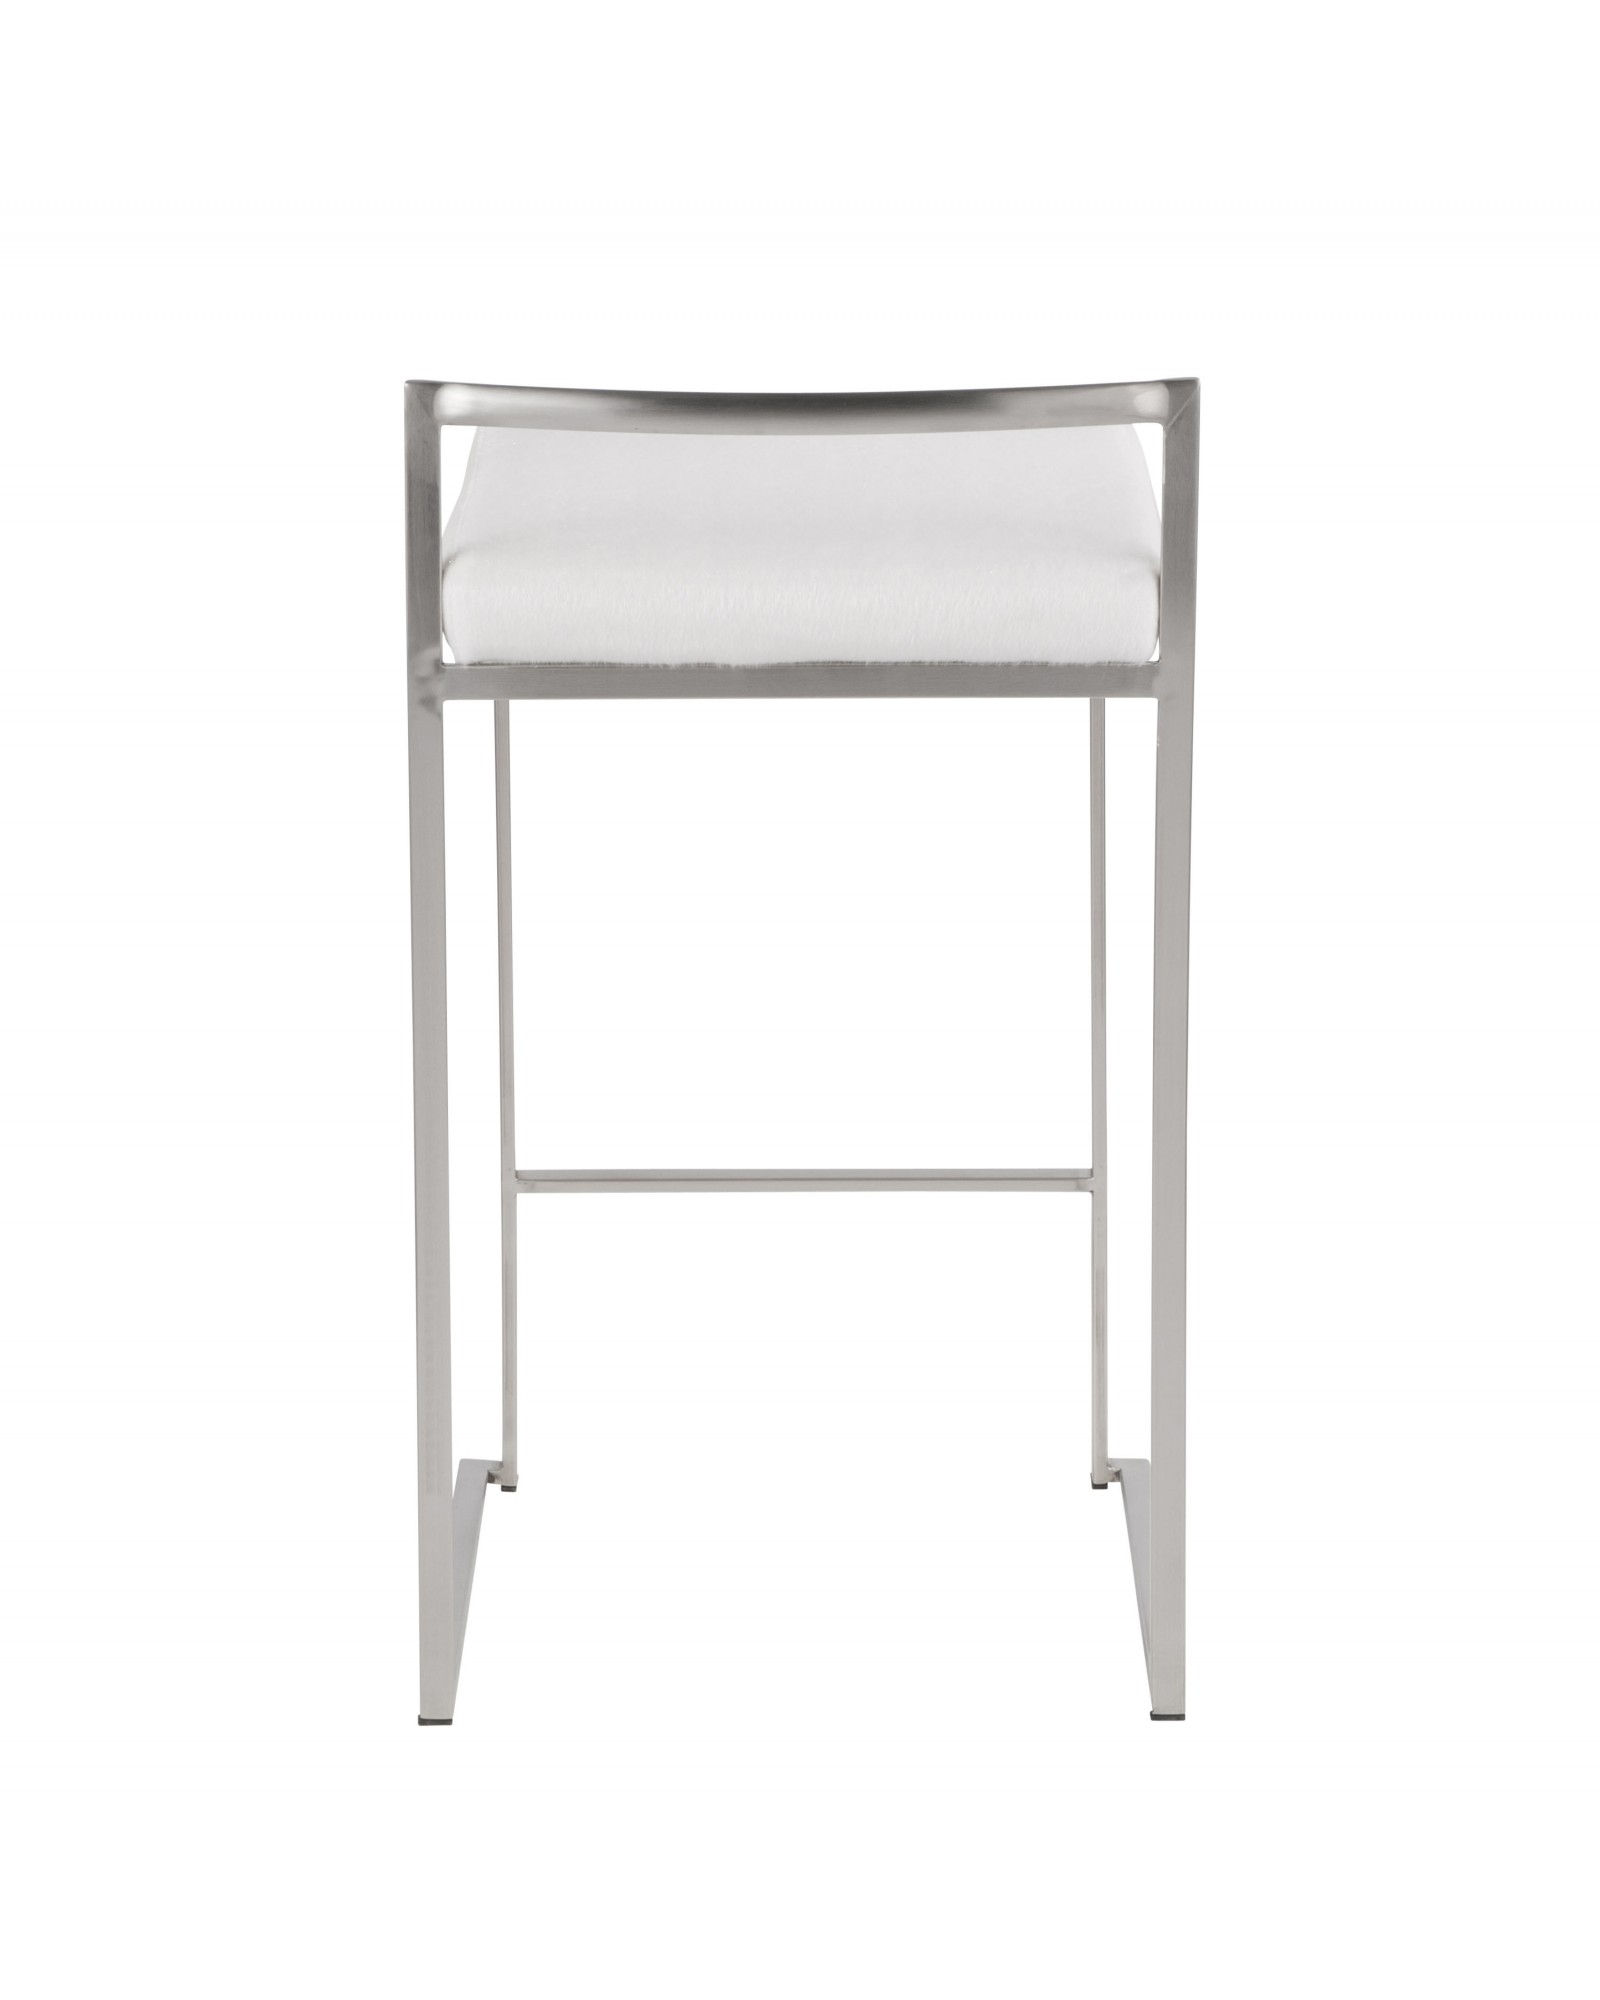 Fuji Contemporary Stackable Counter Stool in Stainless Steel with White Mohair Cushion - Set of 2